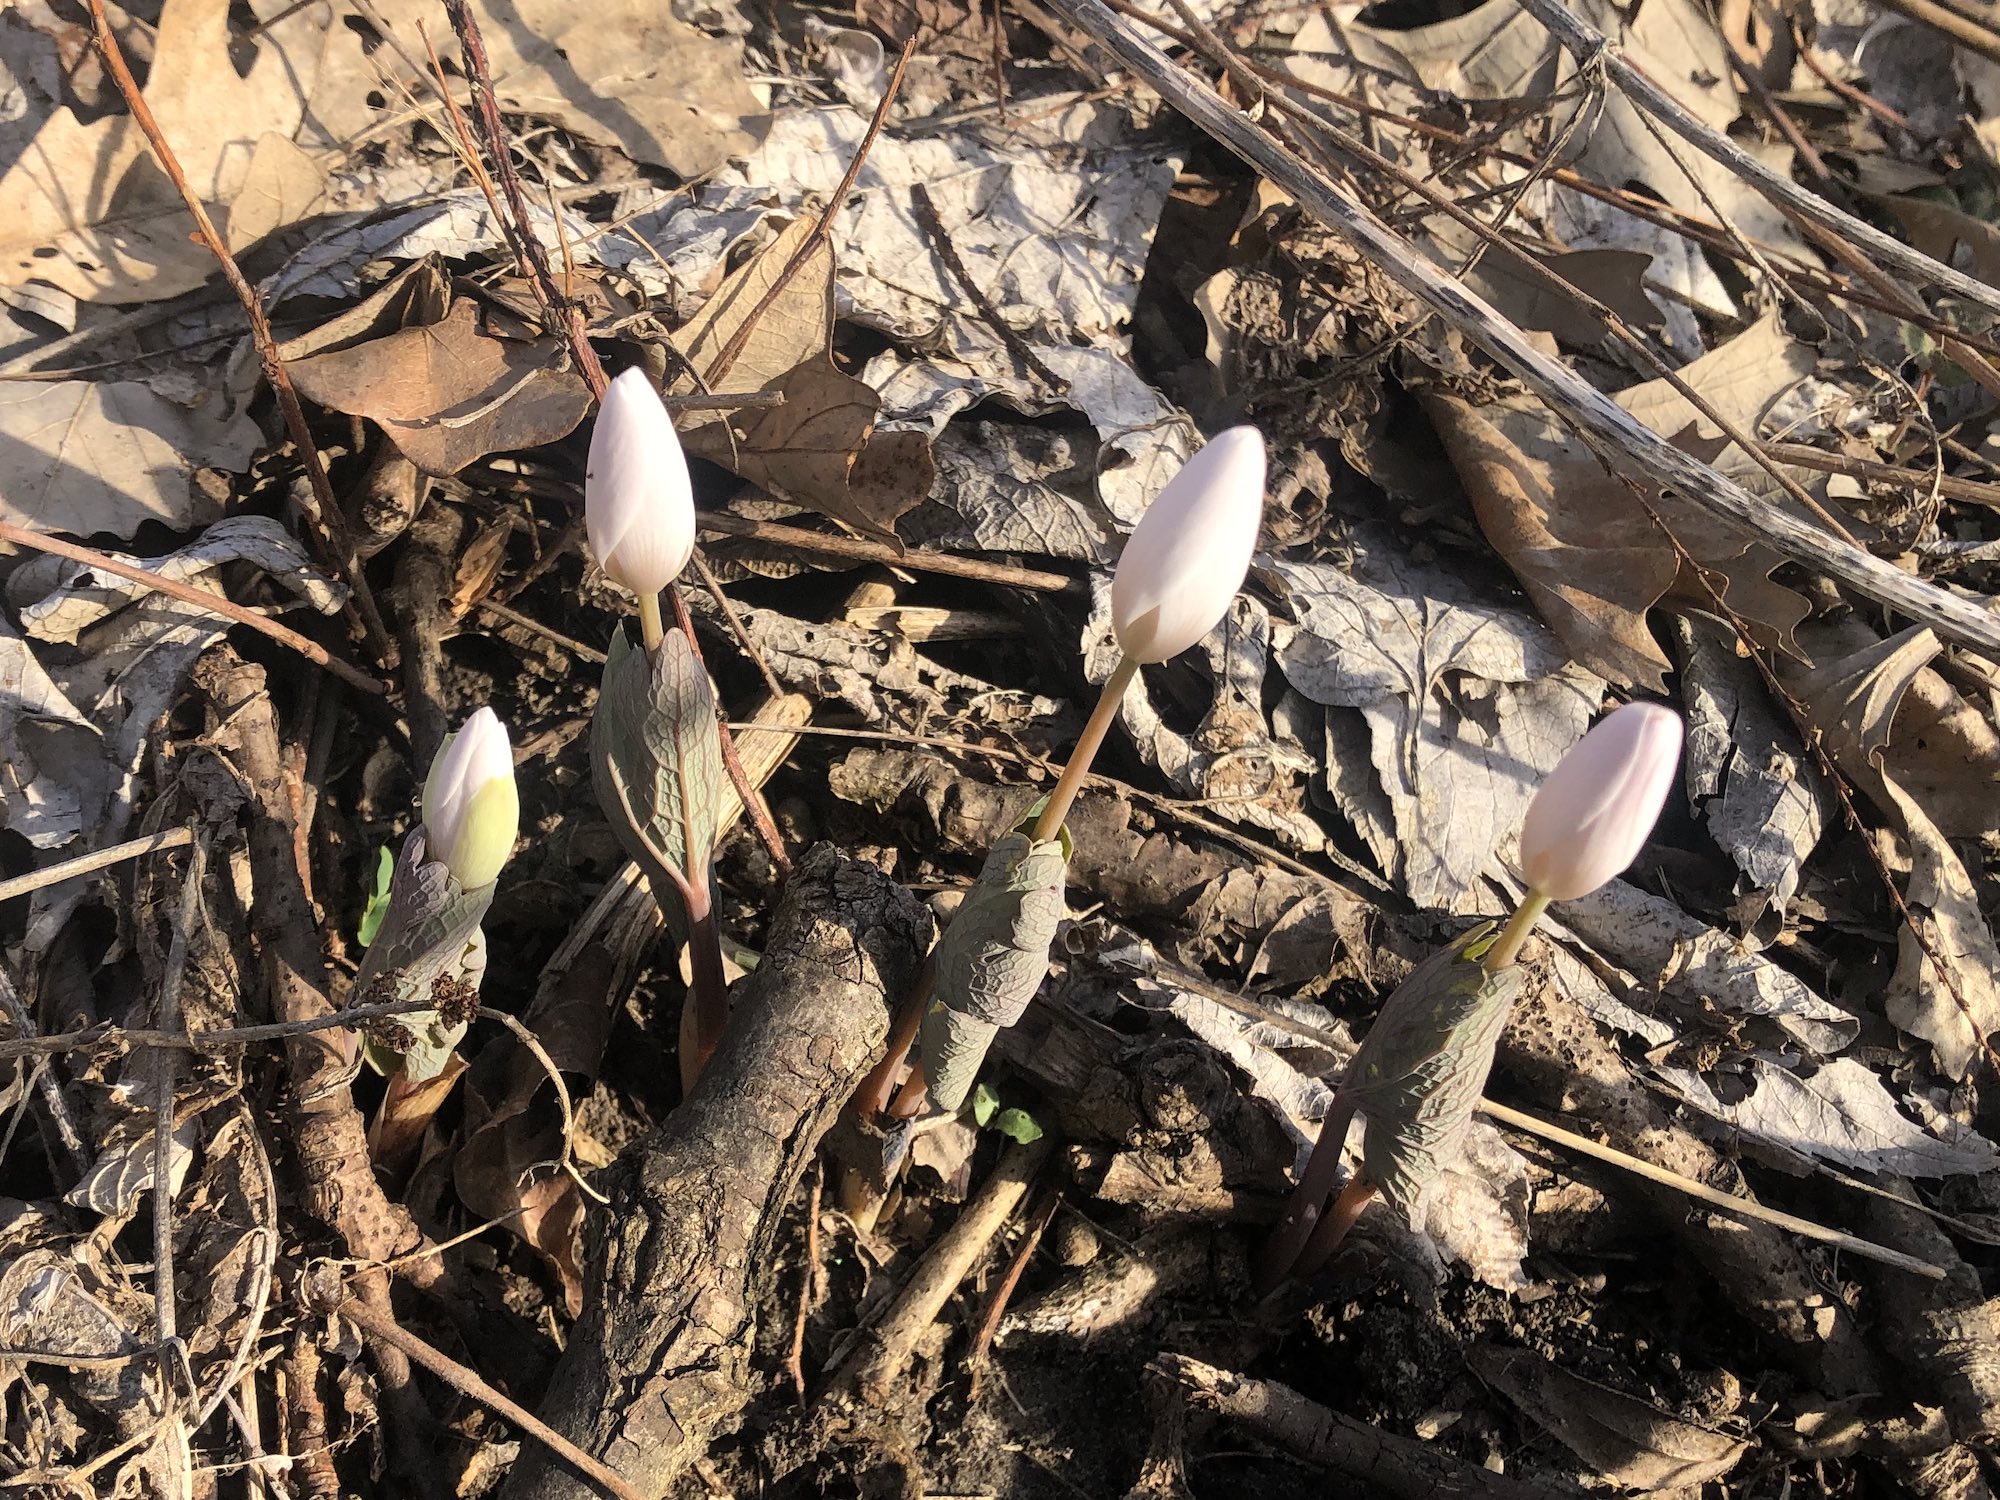 Bloodroot in Oak Savanna by Council Ring in Madison, Wisconsin on April 11, 2023.